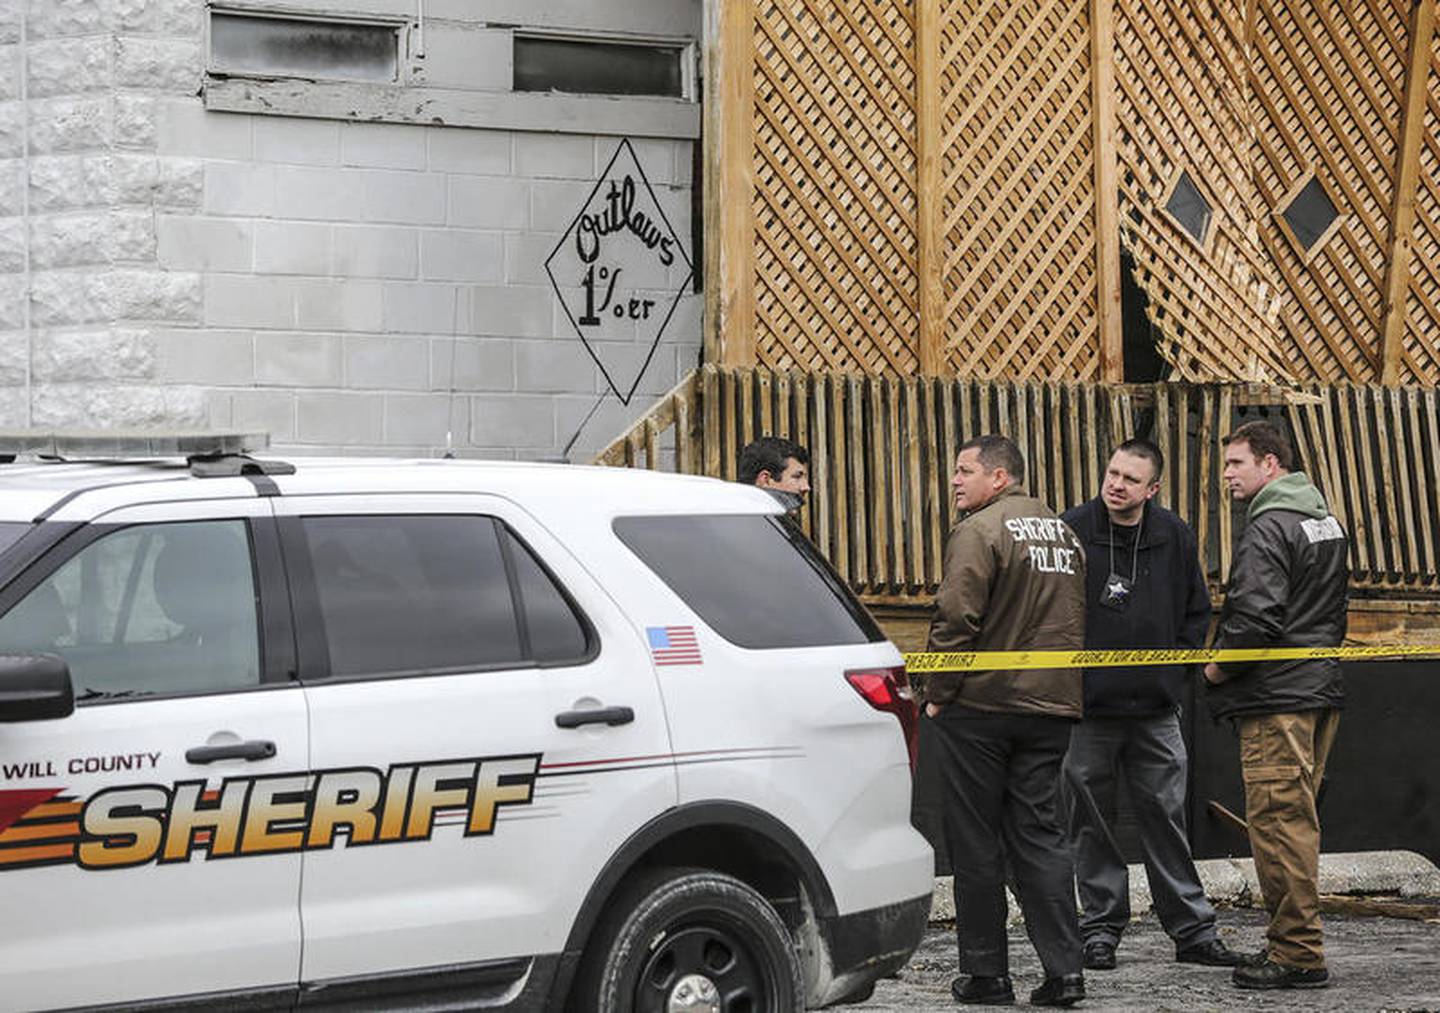 Will County investigators search the Outlaws Motorcycle Club's clubhouse Thursday after Kaitlyn Kearns, a 24-year-old bartender from Joliet, was found dead from a gunshot in a rural area of Kankakee County, according to a sheriff’s office news release.